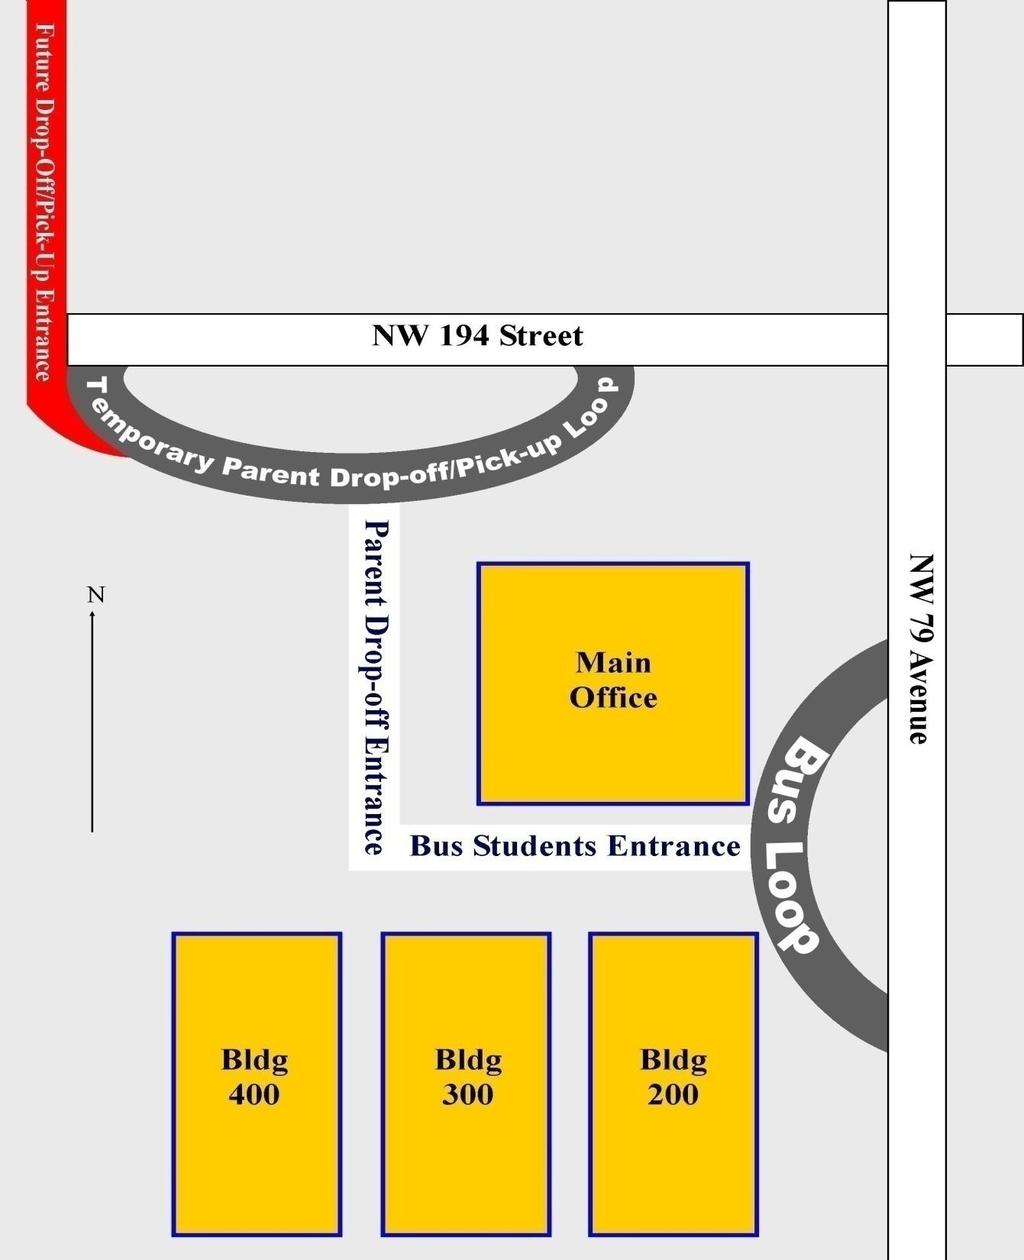 N.W. 197 Street N W Lawton Chiles Middle School No Left 8 2 Please use the roadway by the NW 82 AVE entrance for pick-up and drop-off.